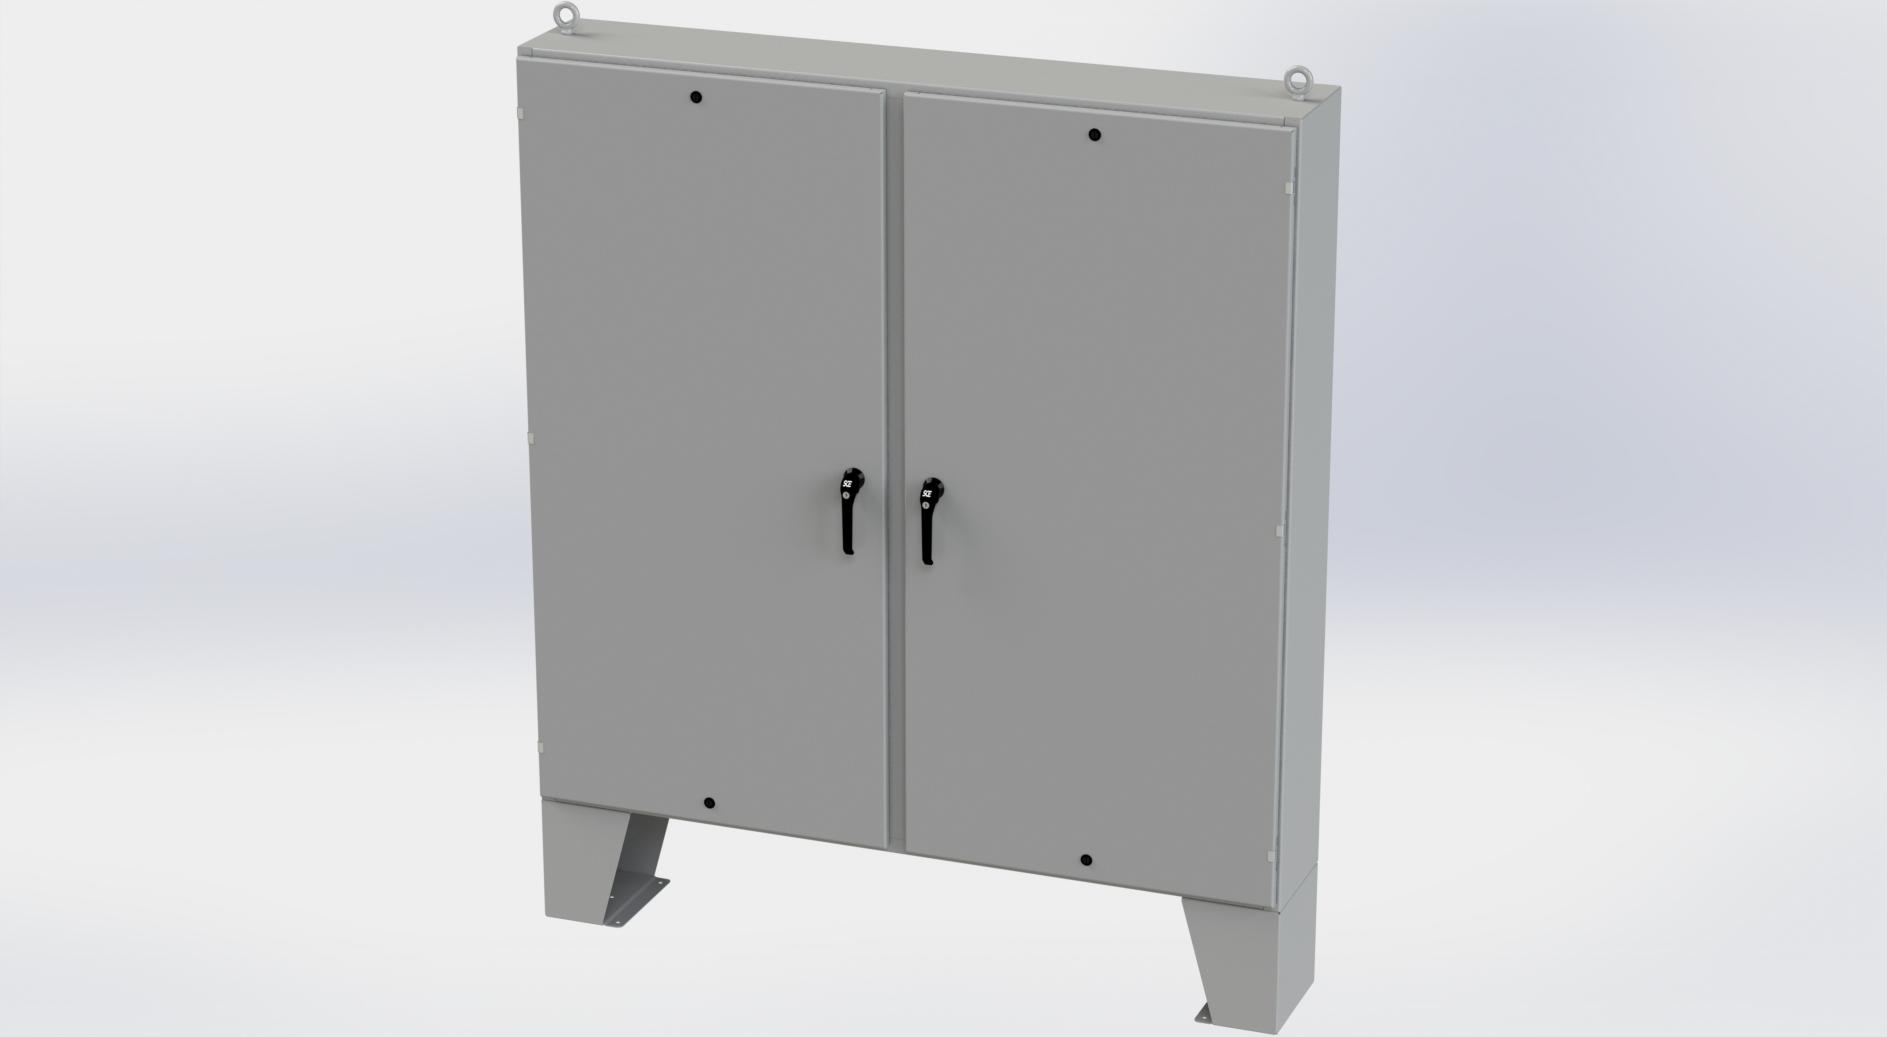 Saginaw Control SCE-72EL7212LPPL 2DR EL LPPL Enclosure, Height:72.00", Width:72.00", Depth:12.00", ANSI-61 gray powder coating inside and out. Optional sub-panels are powder coated white.